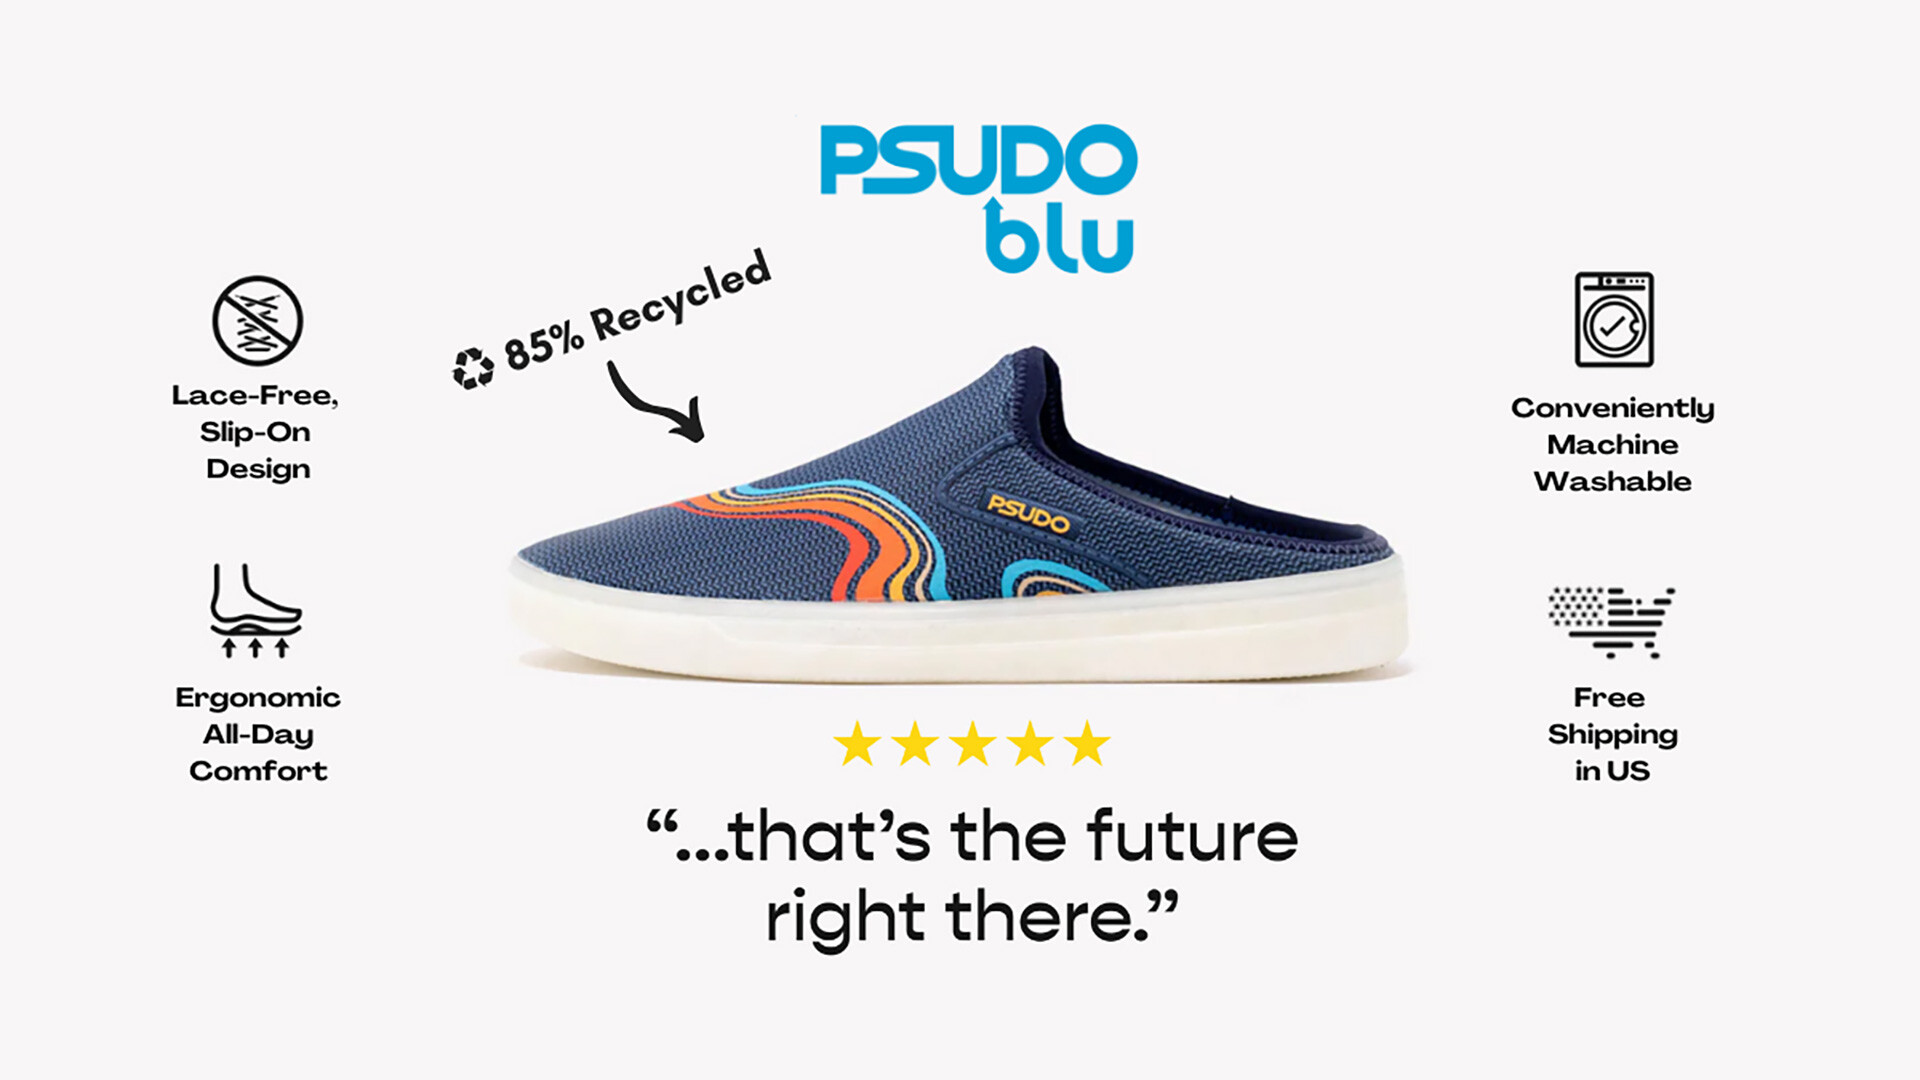 PSUDO blu mule shoe social ad reading "Lace-free, slip-on design;" "ergonomic all-day comfort;" "conveniently machine-washable;" and "free shipping in the US" coupled with a customer testimonial reading "...that's the future right there."